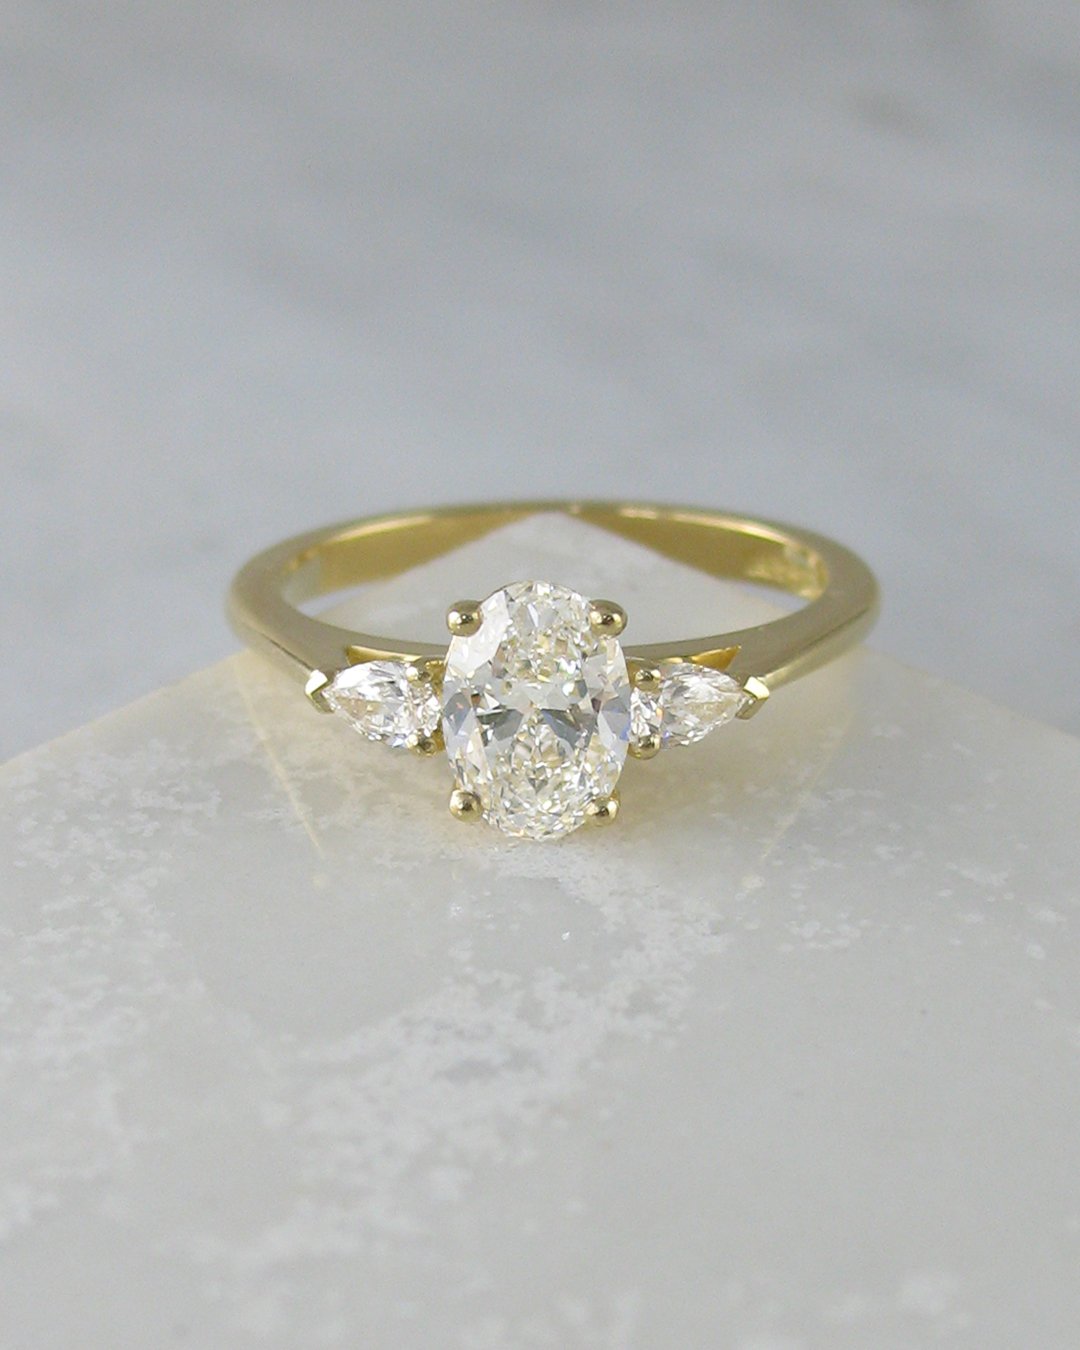 An elegant oval cut and pear shaped diamond engagement ring.